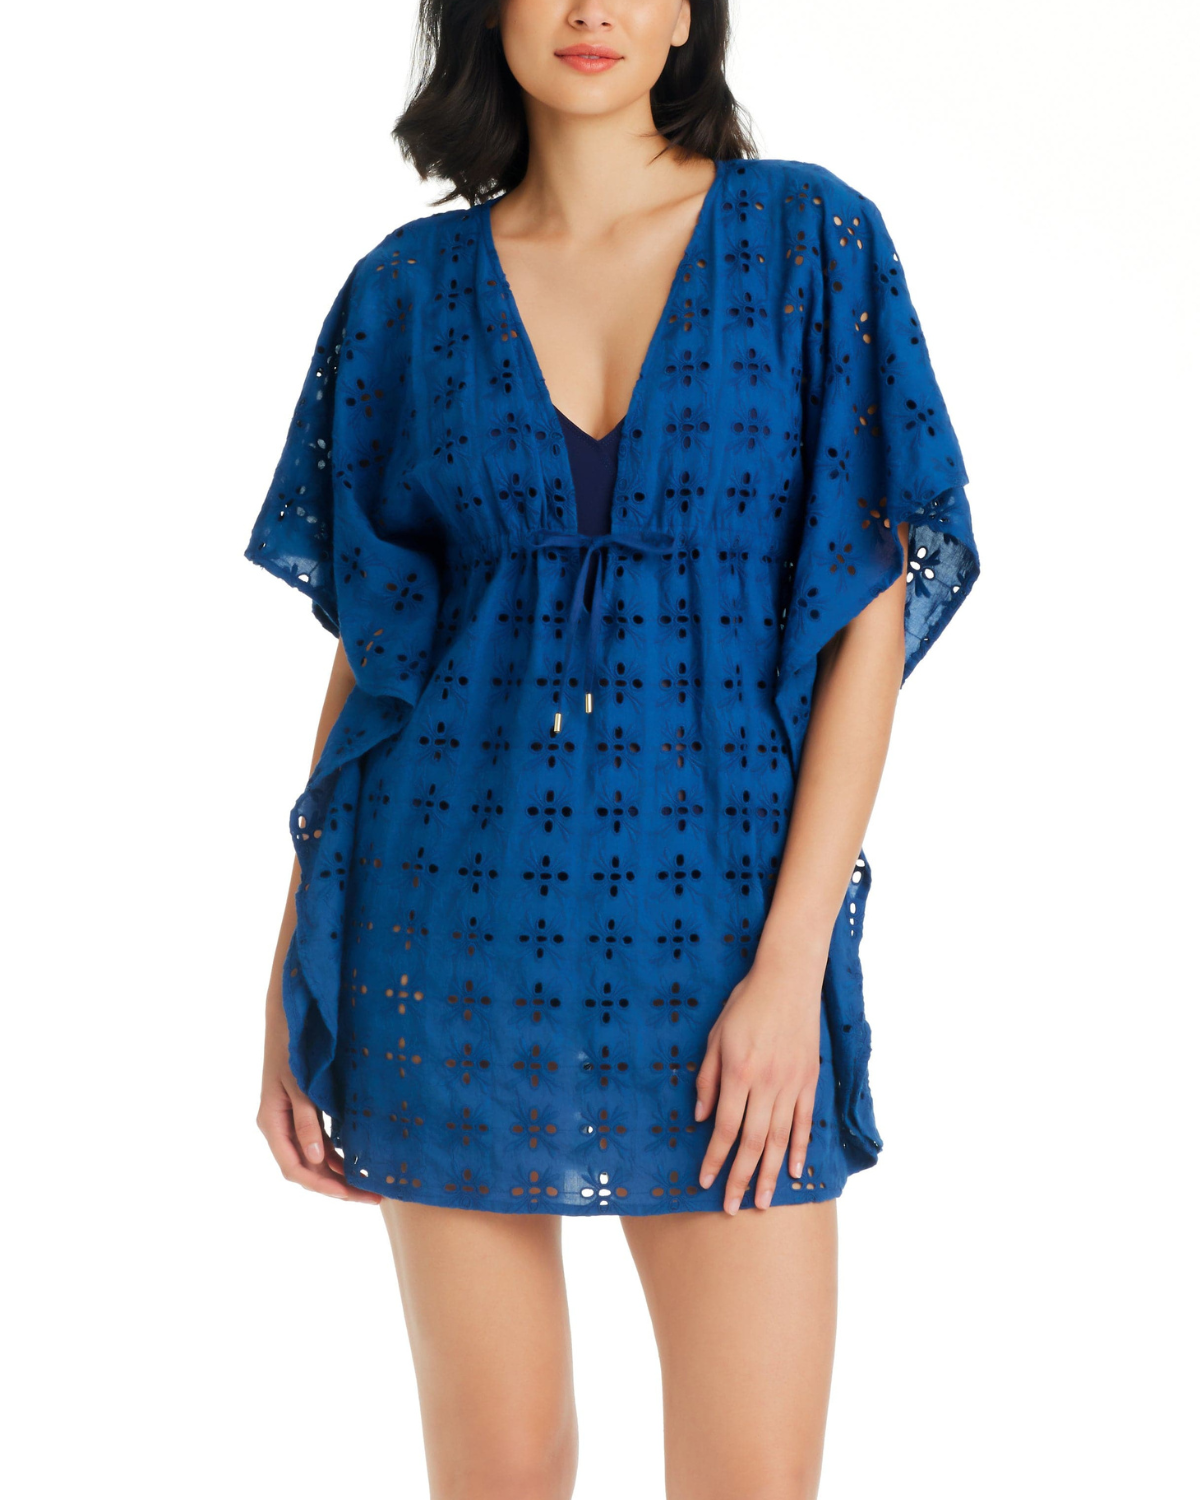 Model wearing a caftan cover up in navy